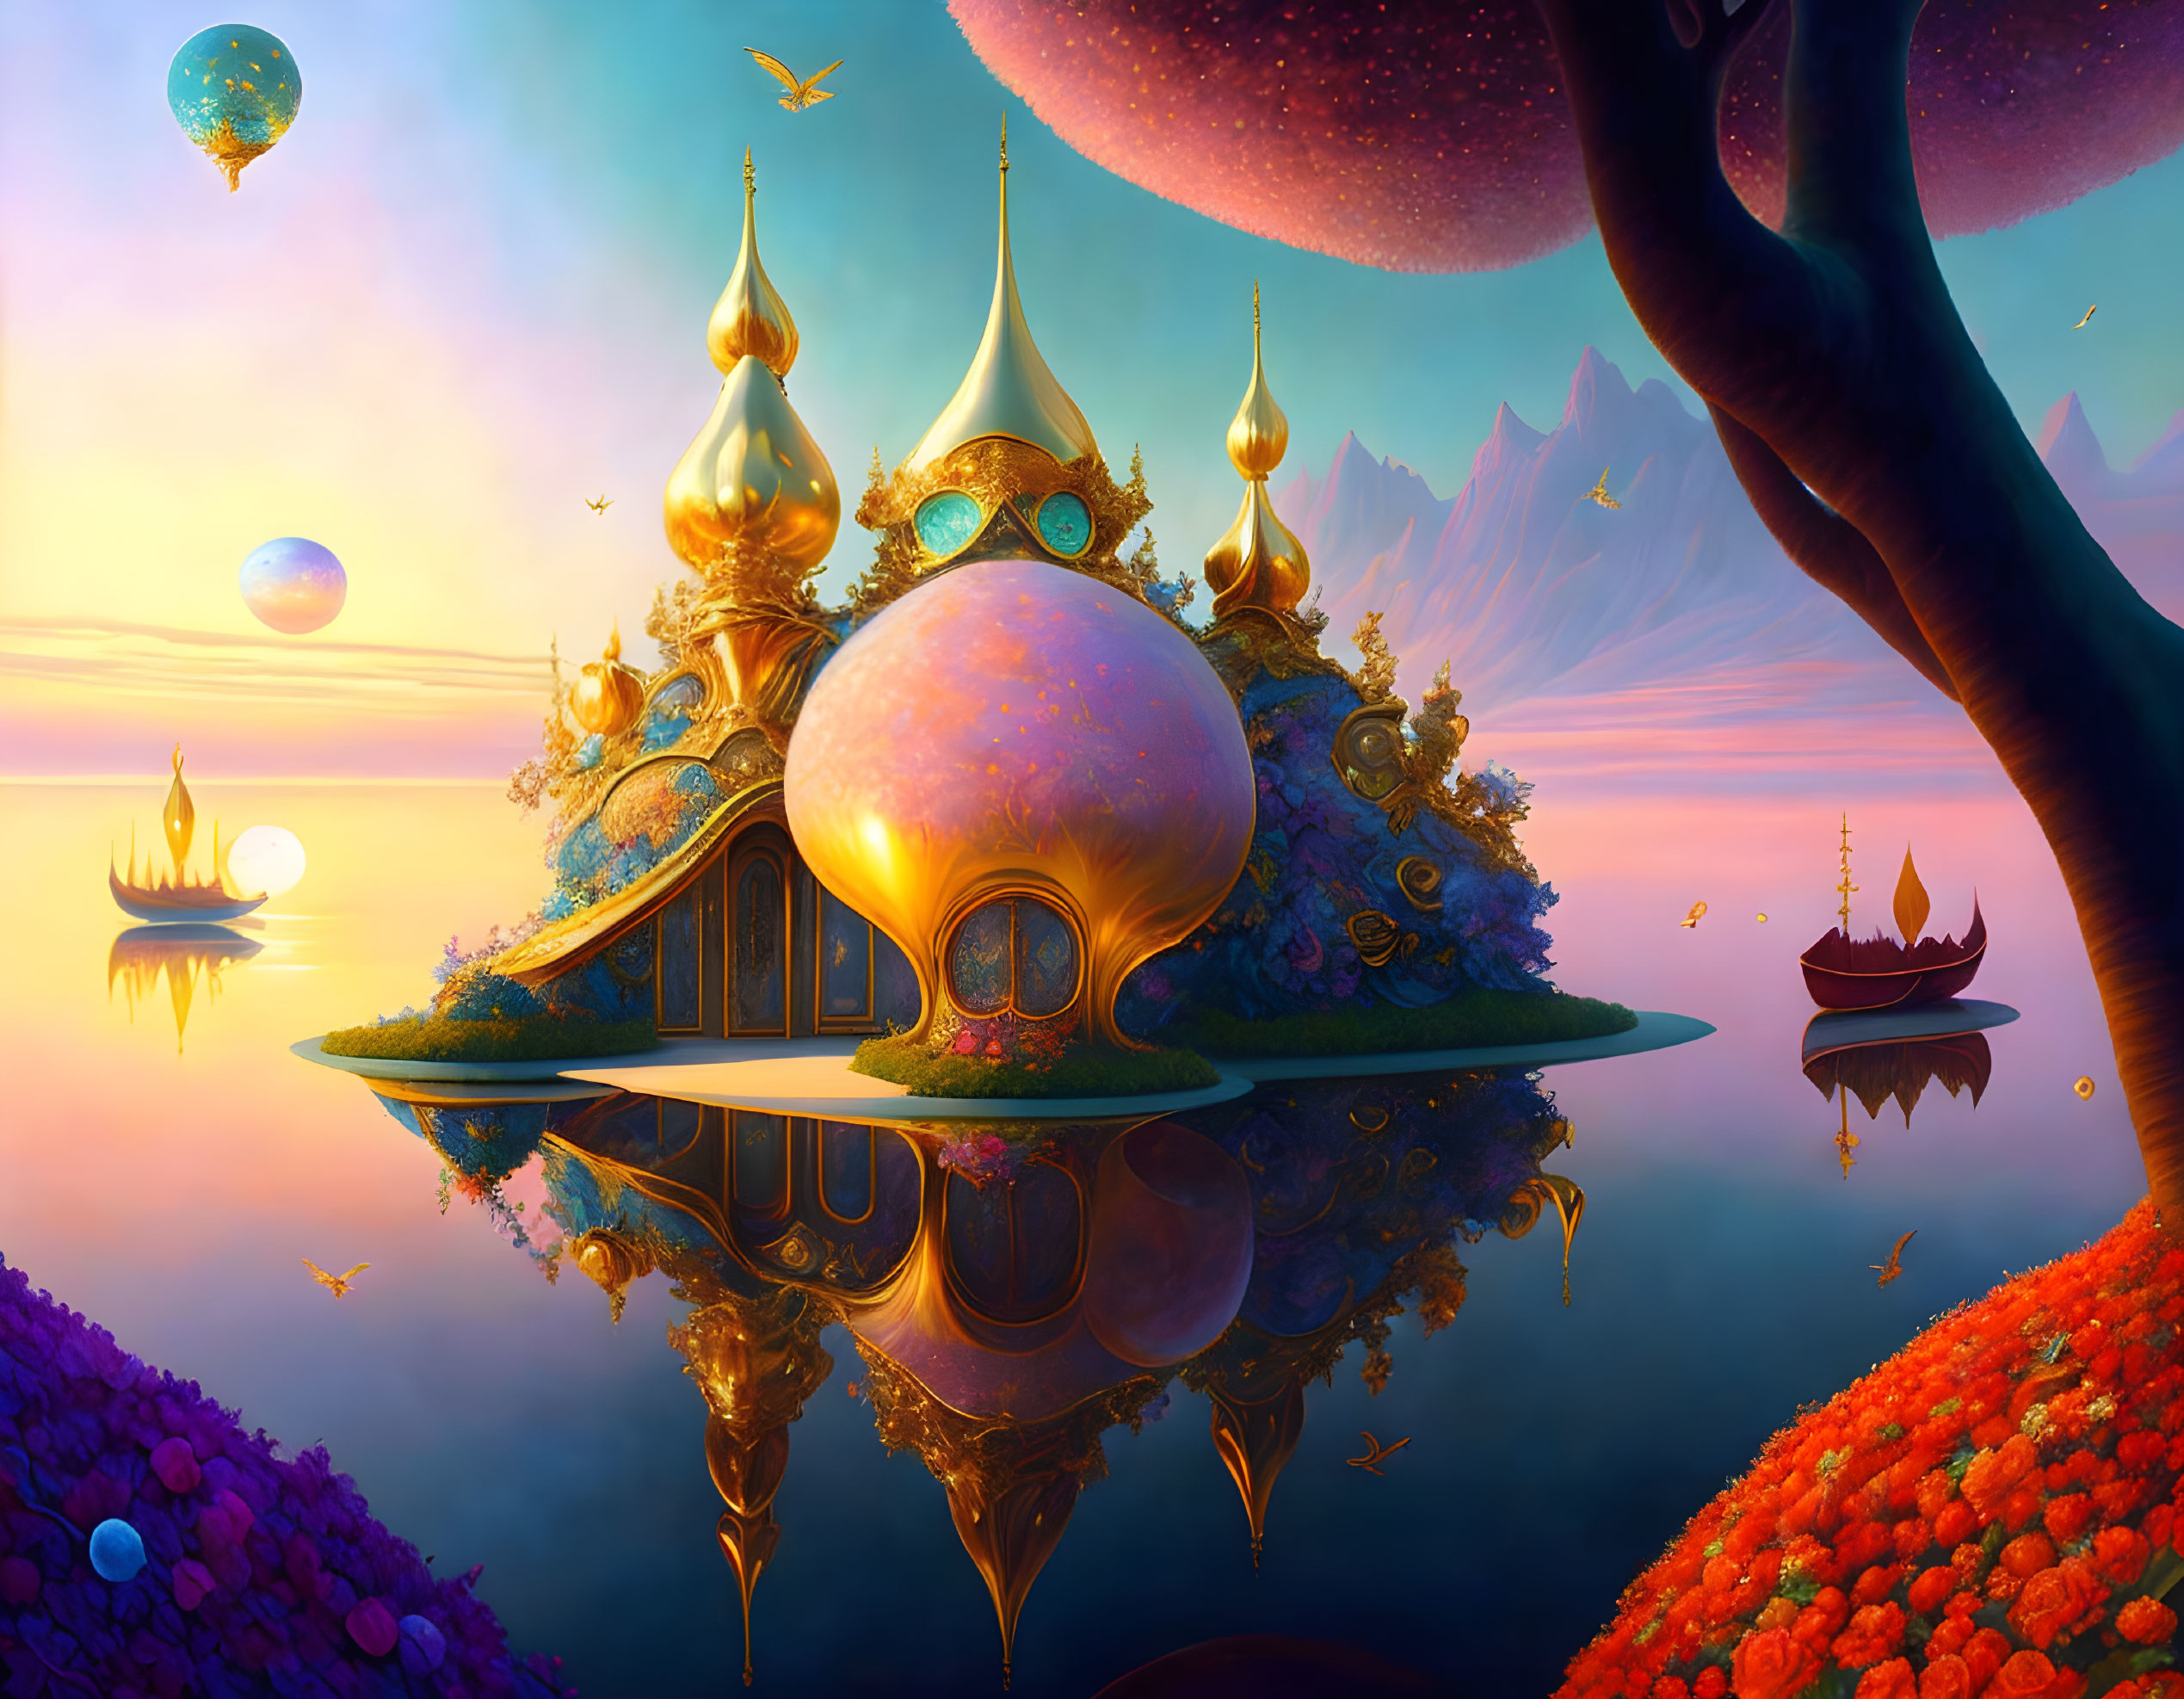 Surreal fantasy dreams from beyond reality